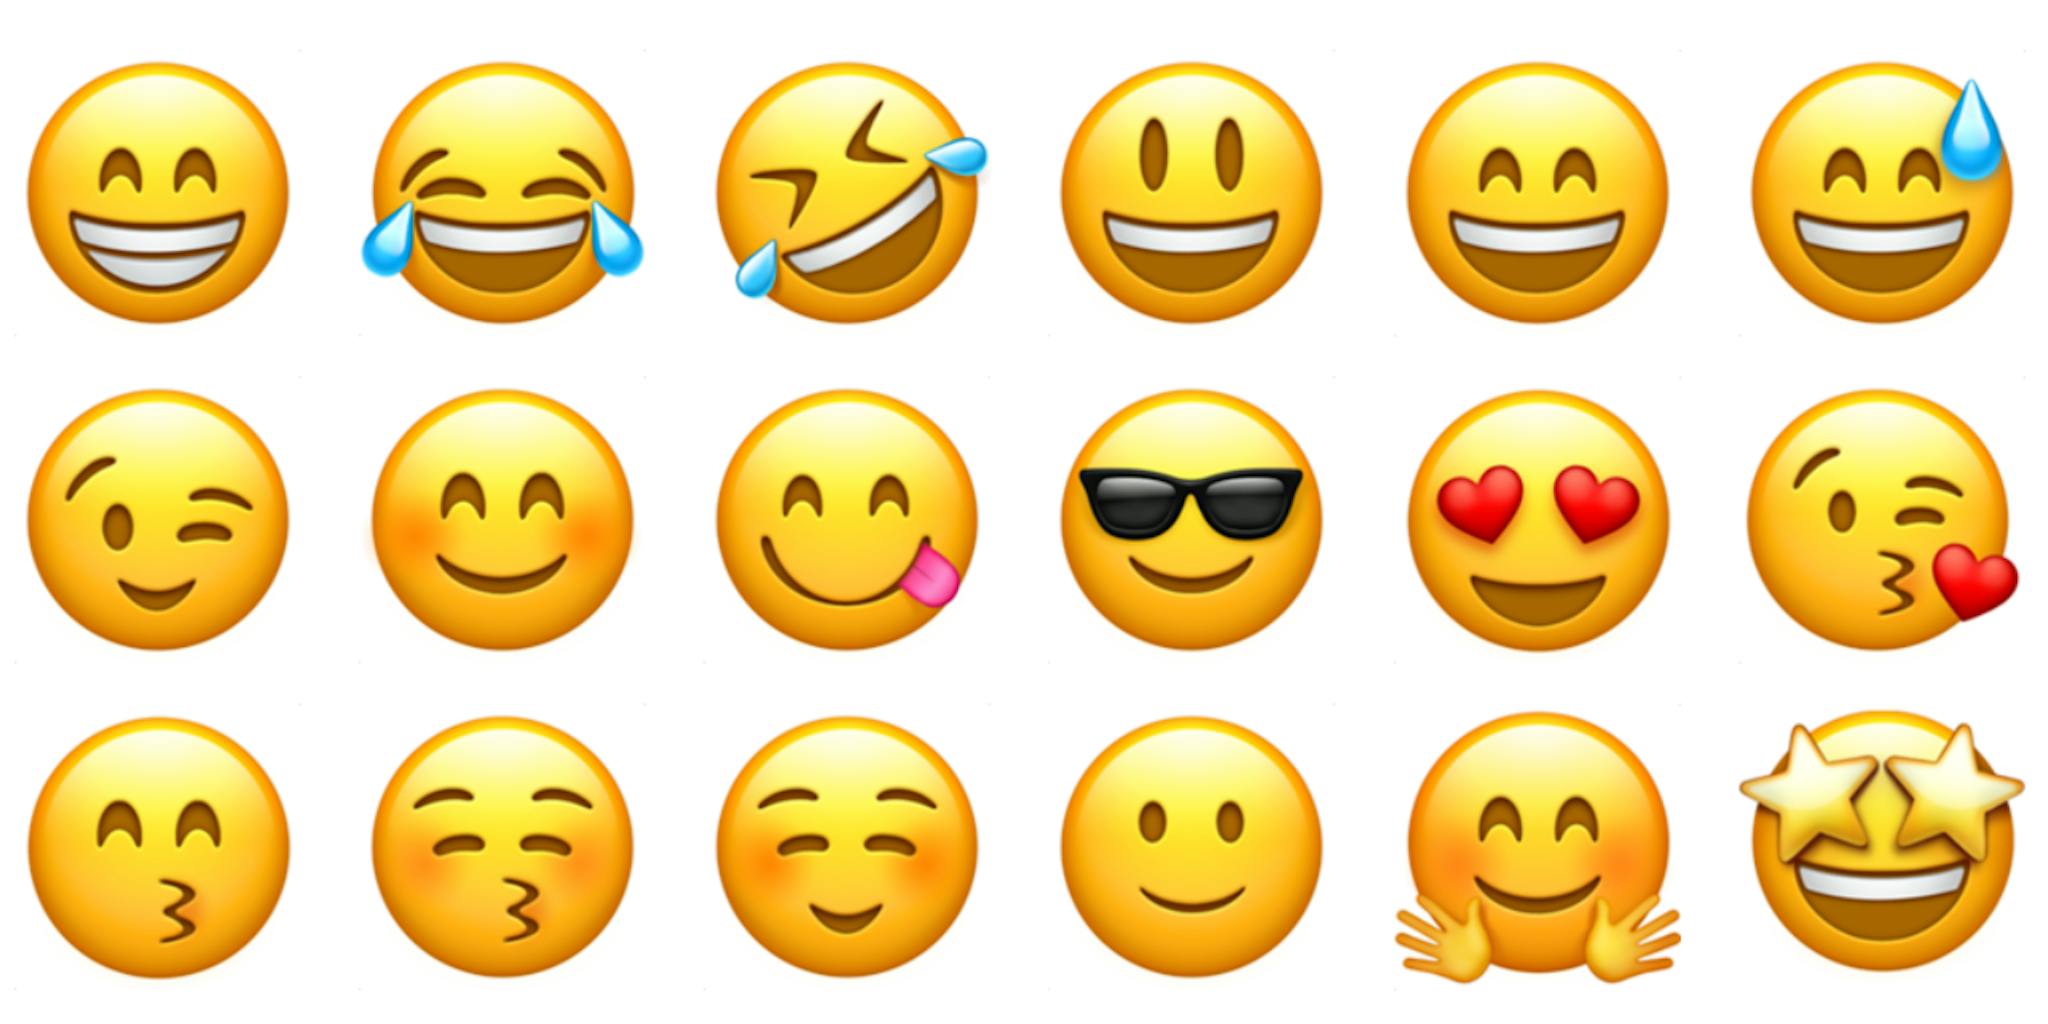 Face With Tears Of Joy Is The Most Popular Iphone Emoji